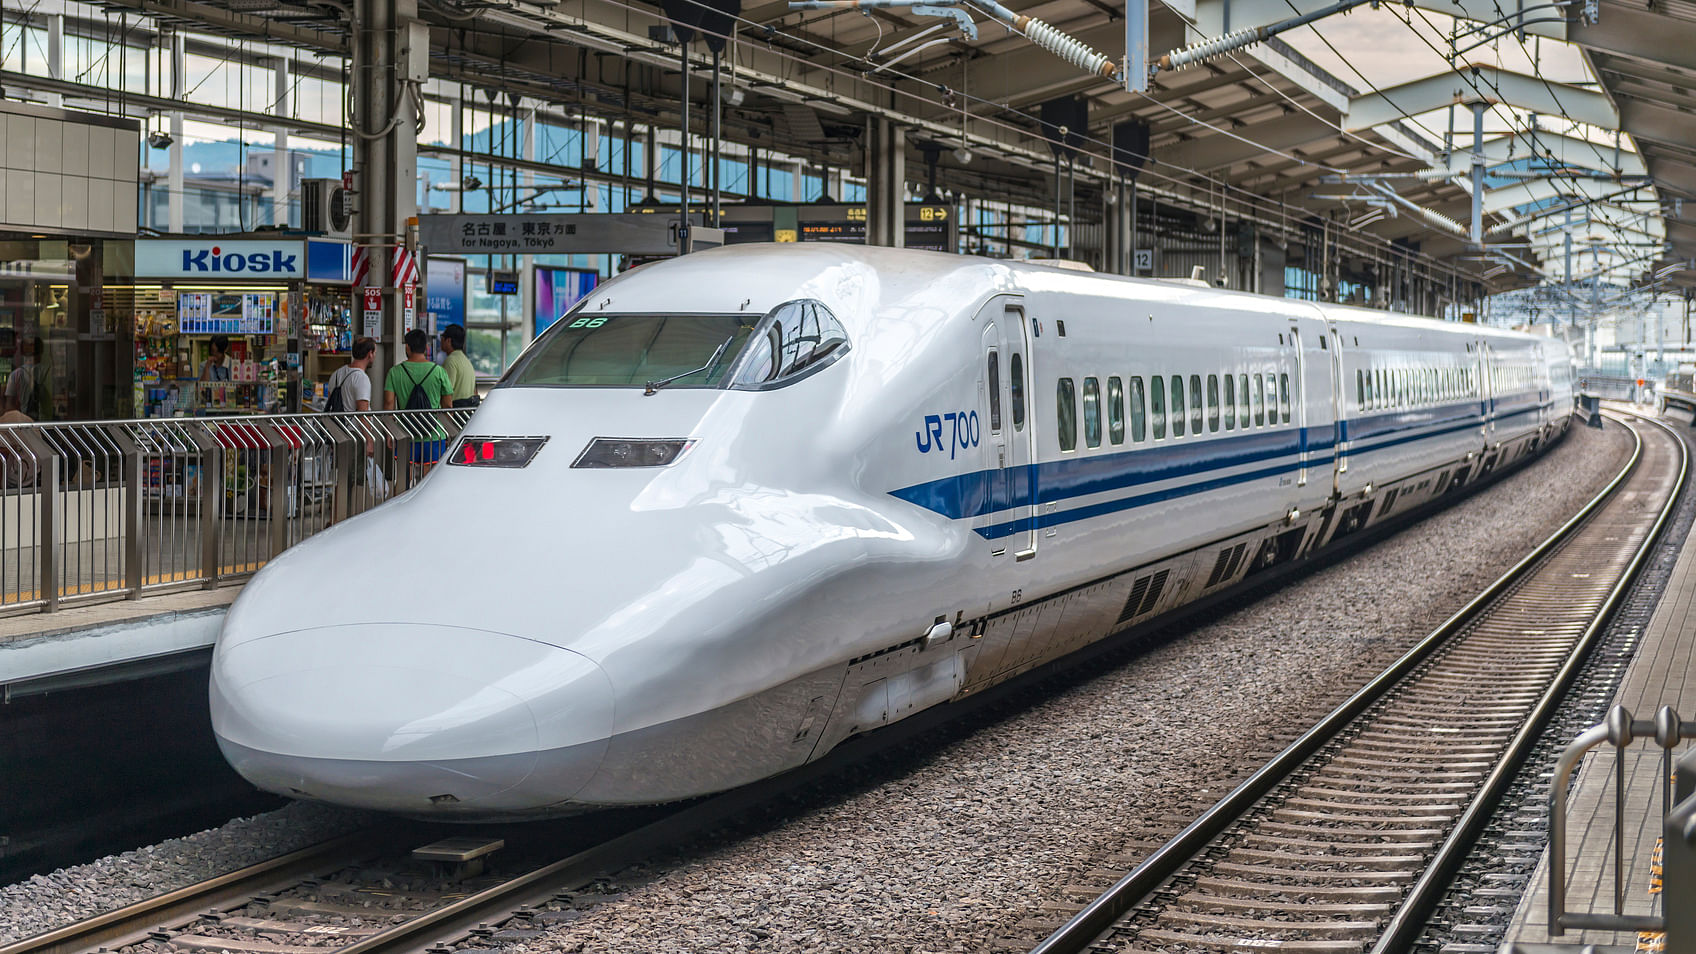 The bullet train in Kyoto, Japan. Image used for representation. (Photo: iStock)